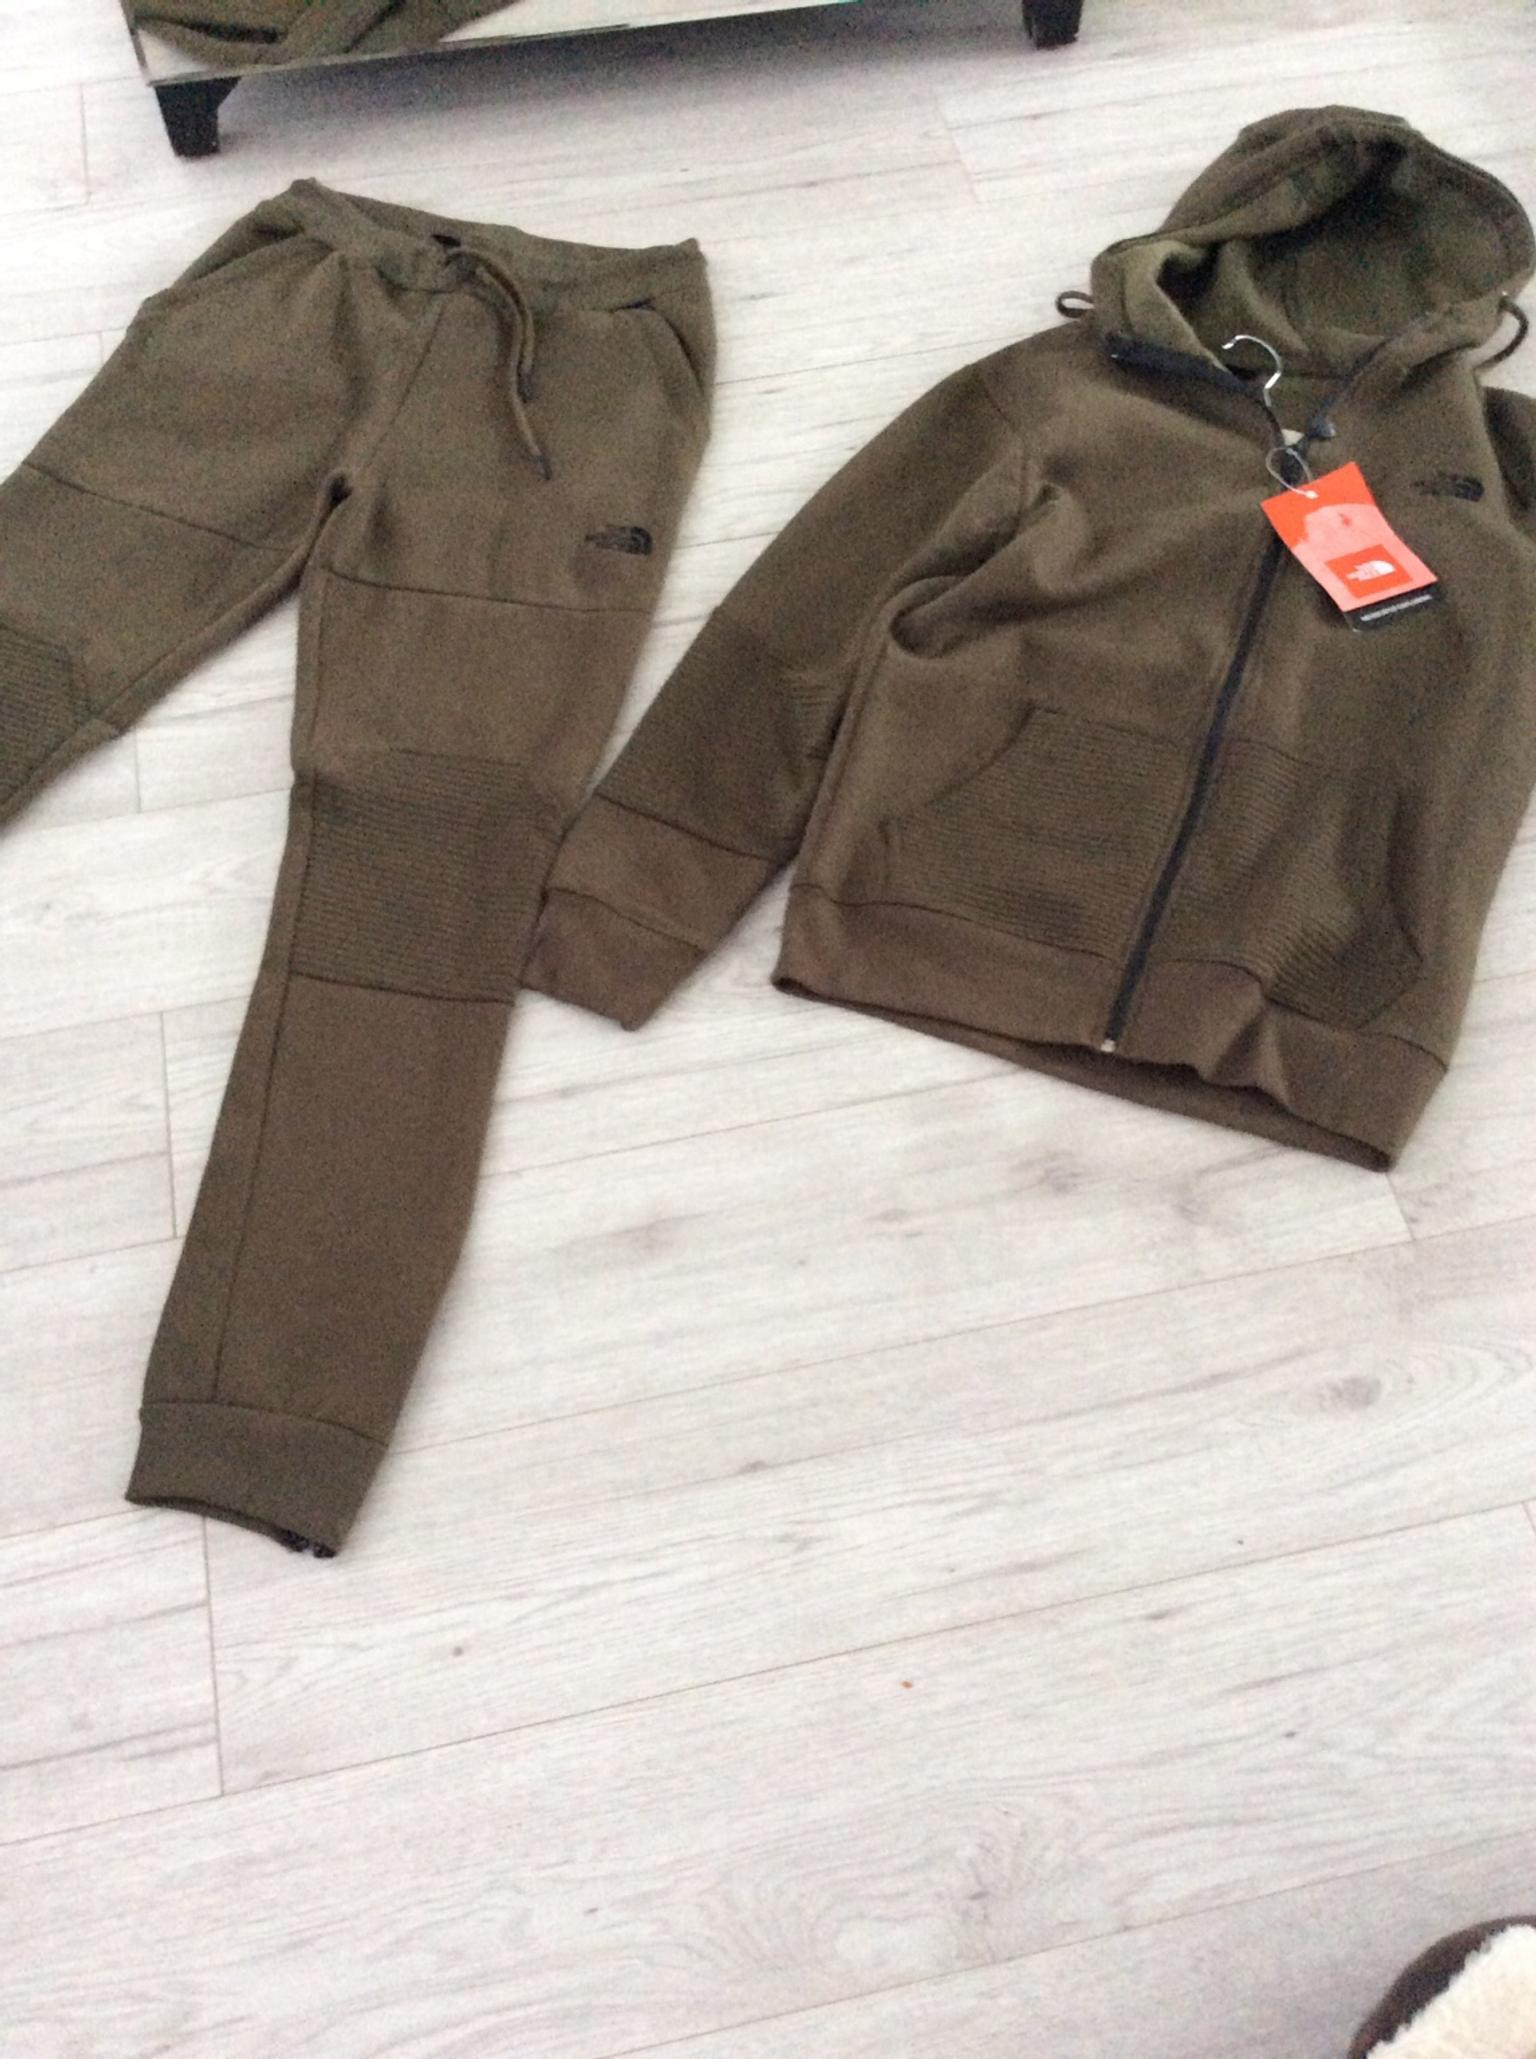 the north face tracksuit sale